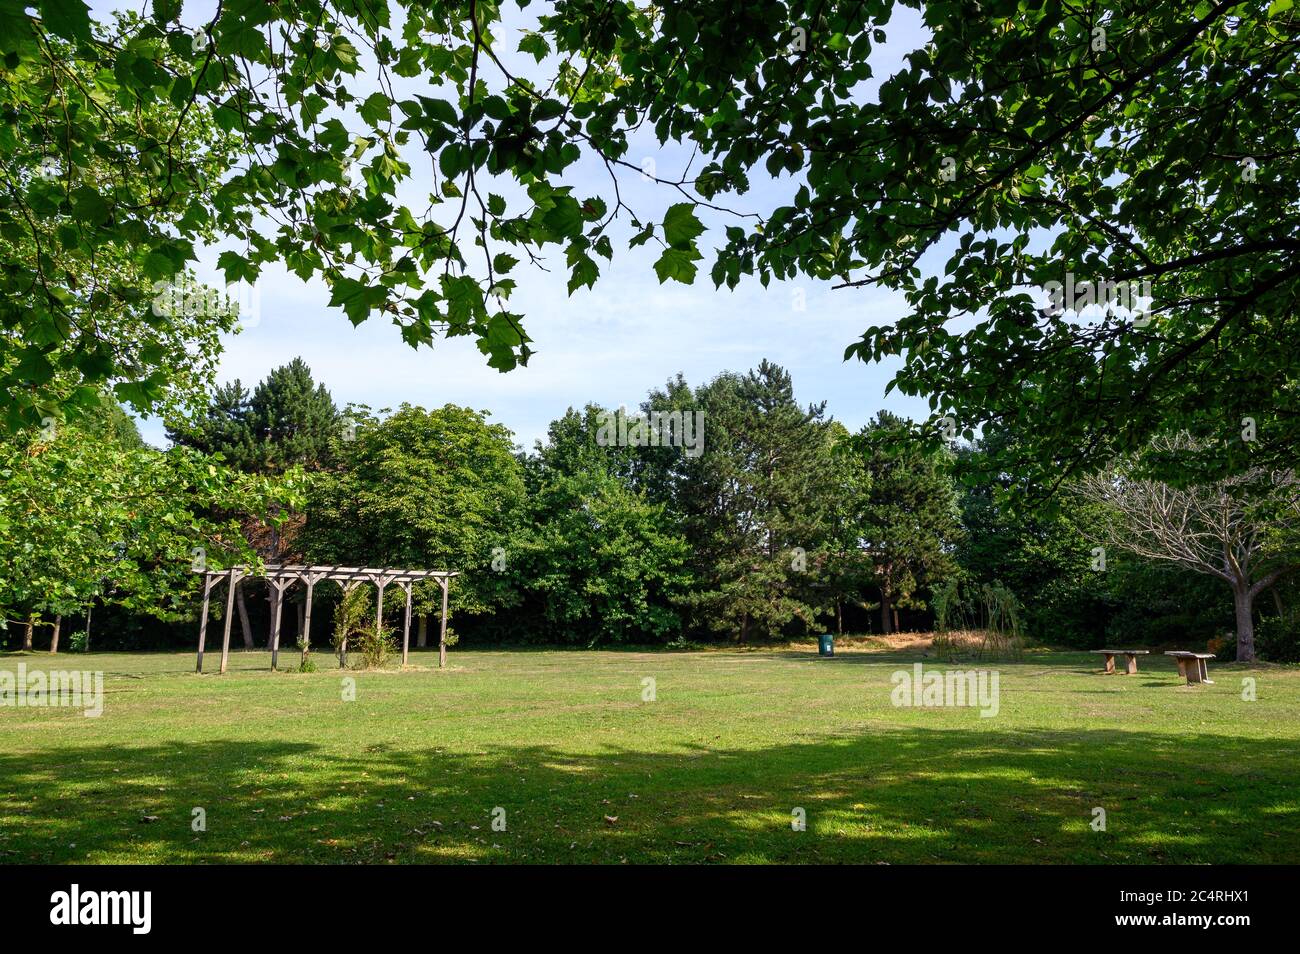 College Green in Bromley (London), Kent. This open space near the center of Bromley has grass, flowers and trees. Photo shows seats and a pergola. Stock Photo